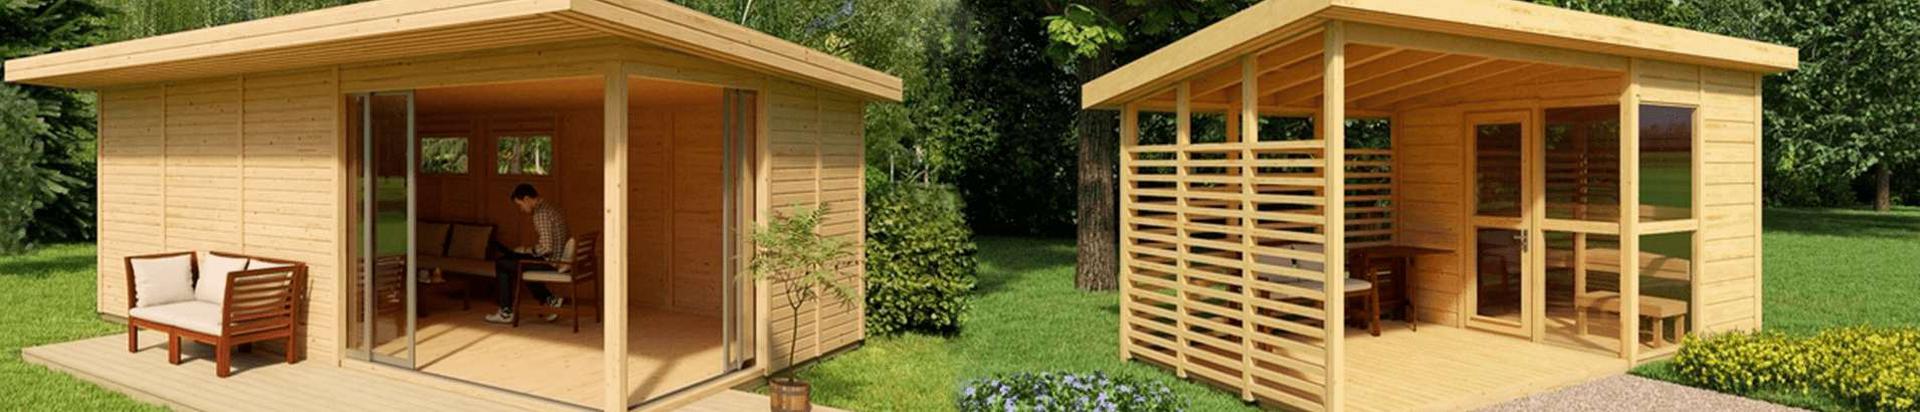 house manufacturing, installation of houses, Wooden buildings, woodware products, wood industry, manufacture of garden houses, Grill Chambers, good quality, kiosks, Home Offices